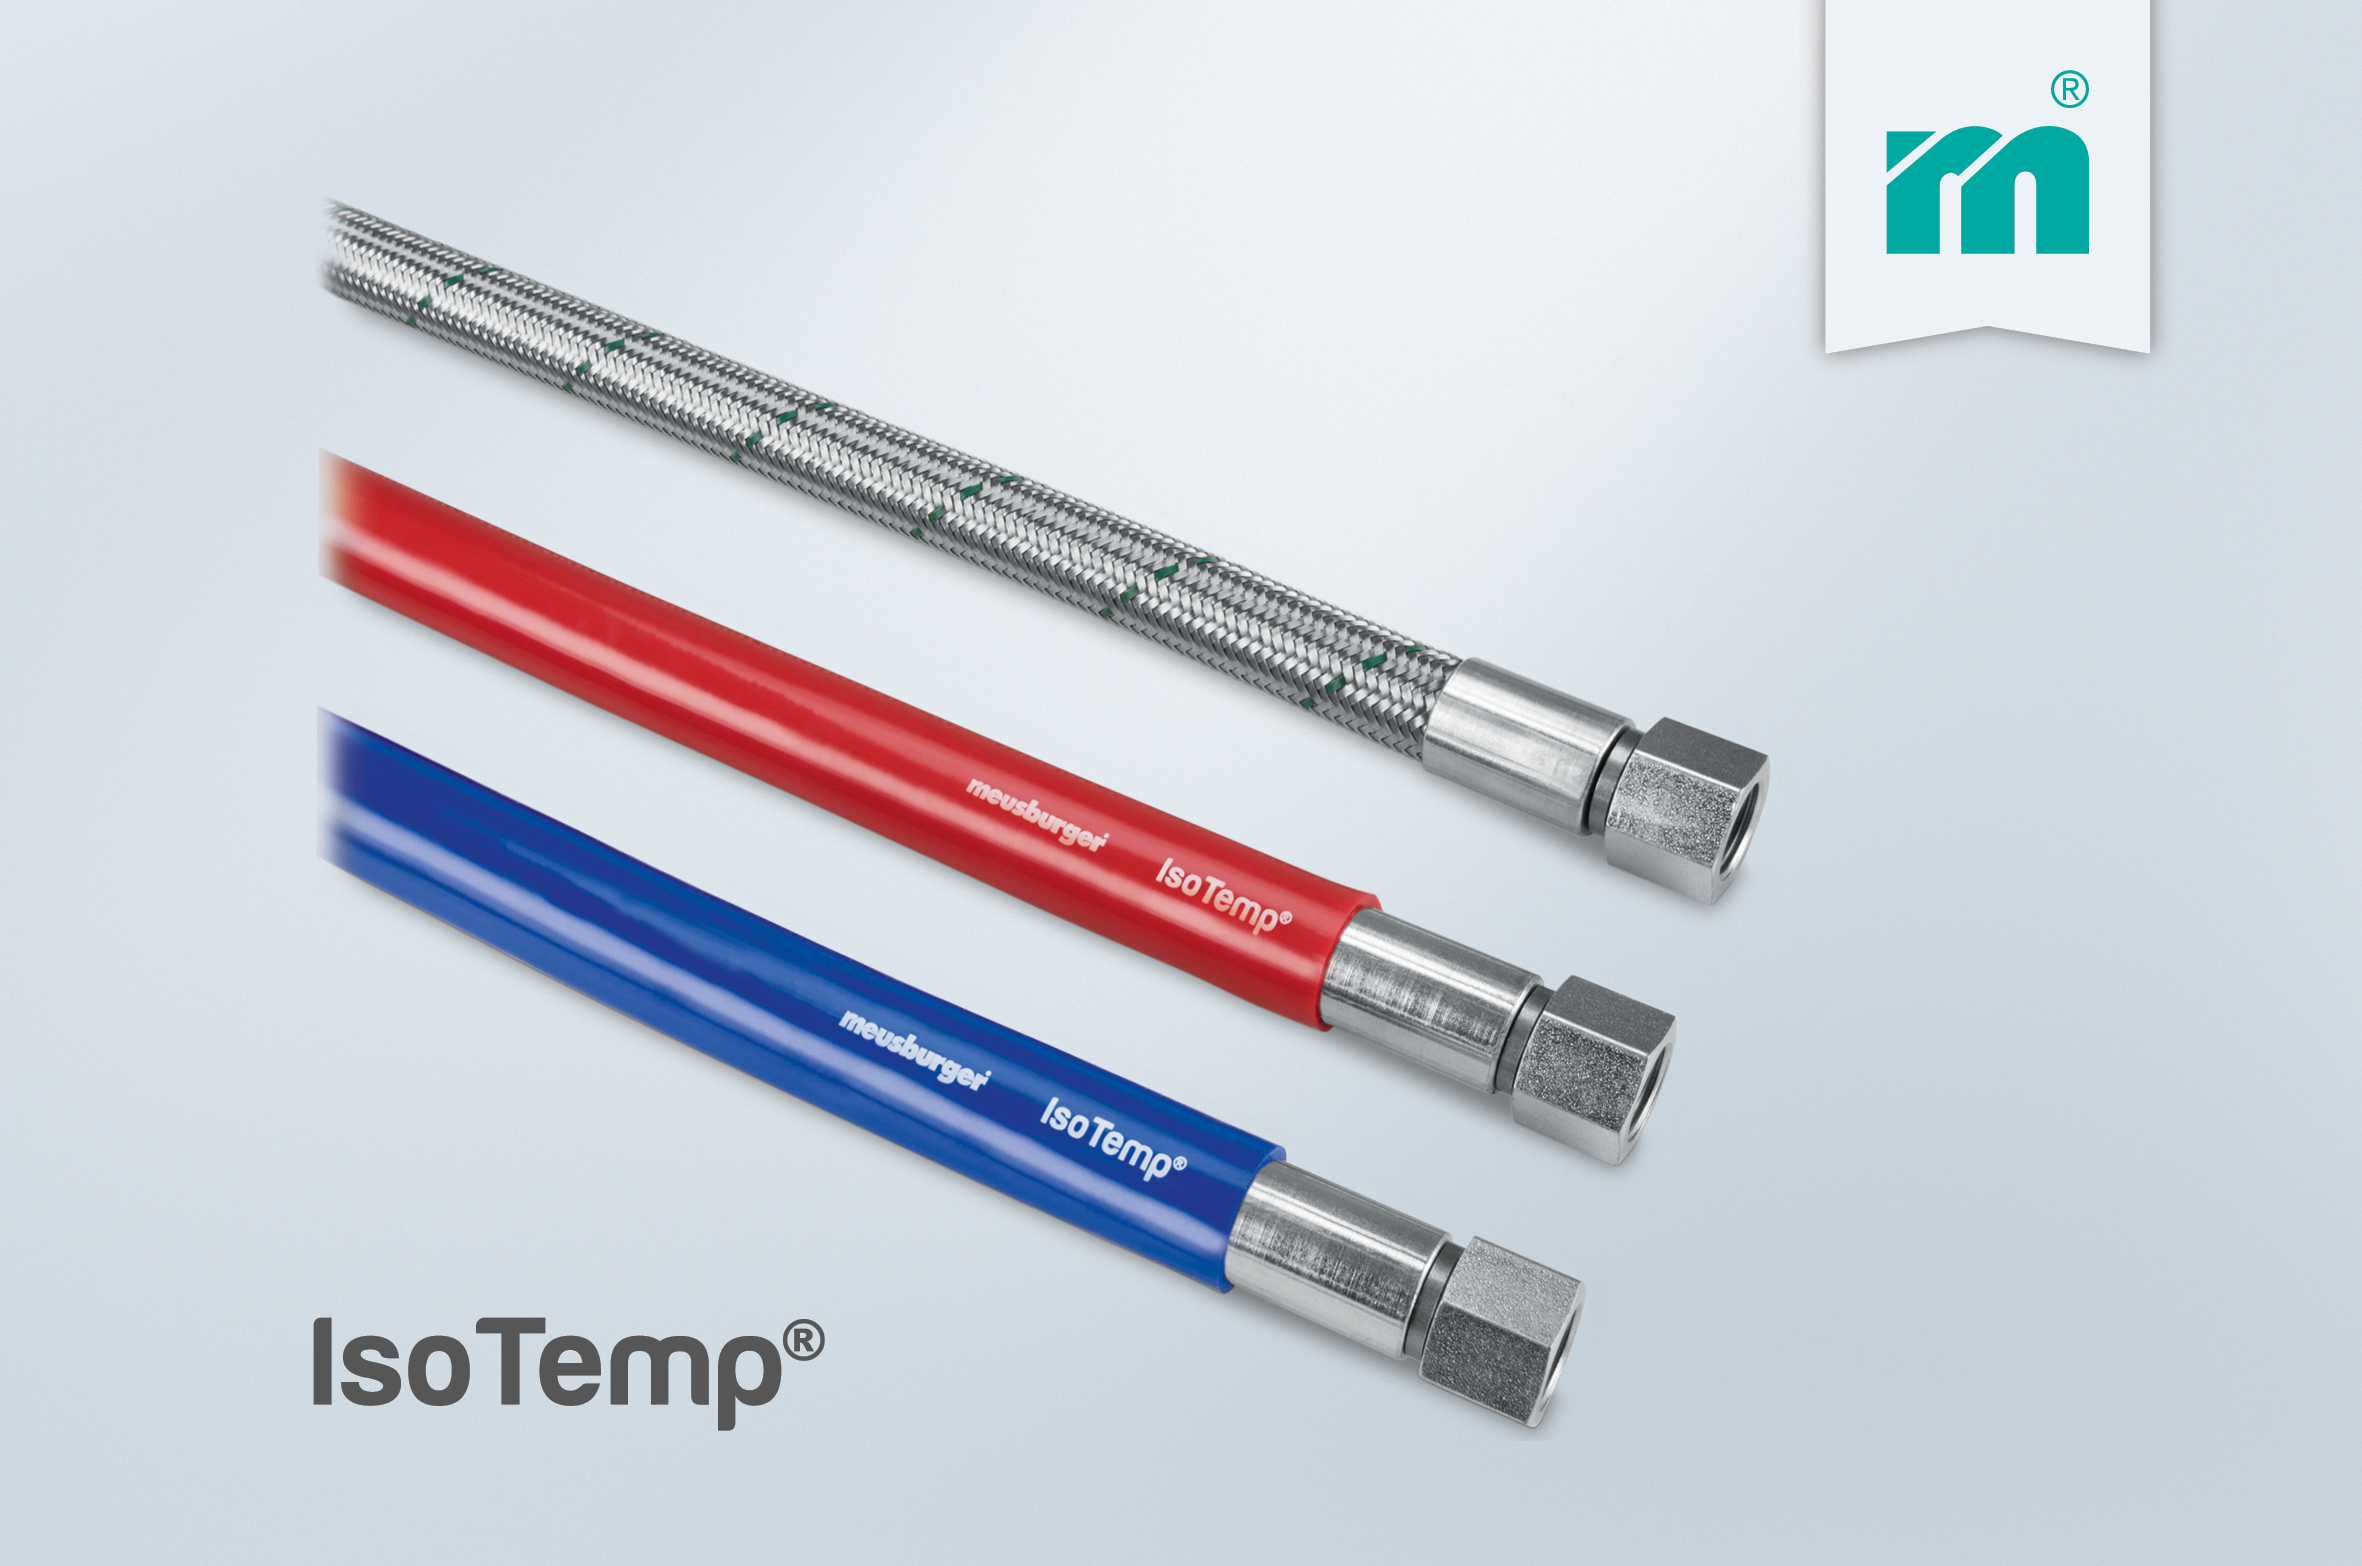 More safety in the operation thanks to the IsoTemp® high temperature hose